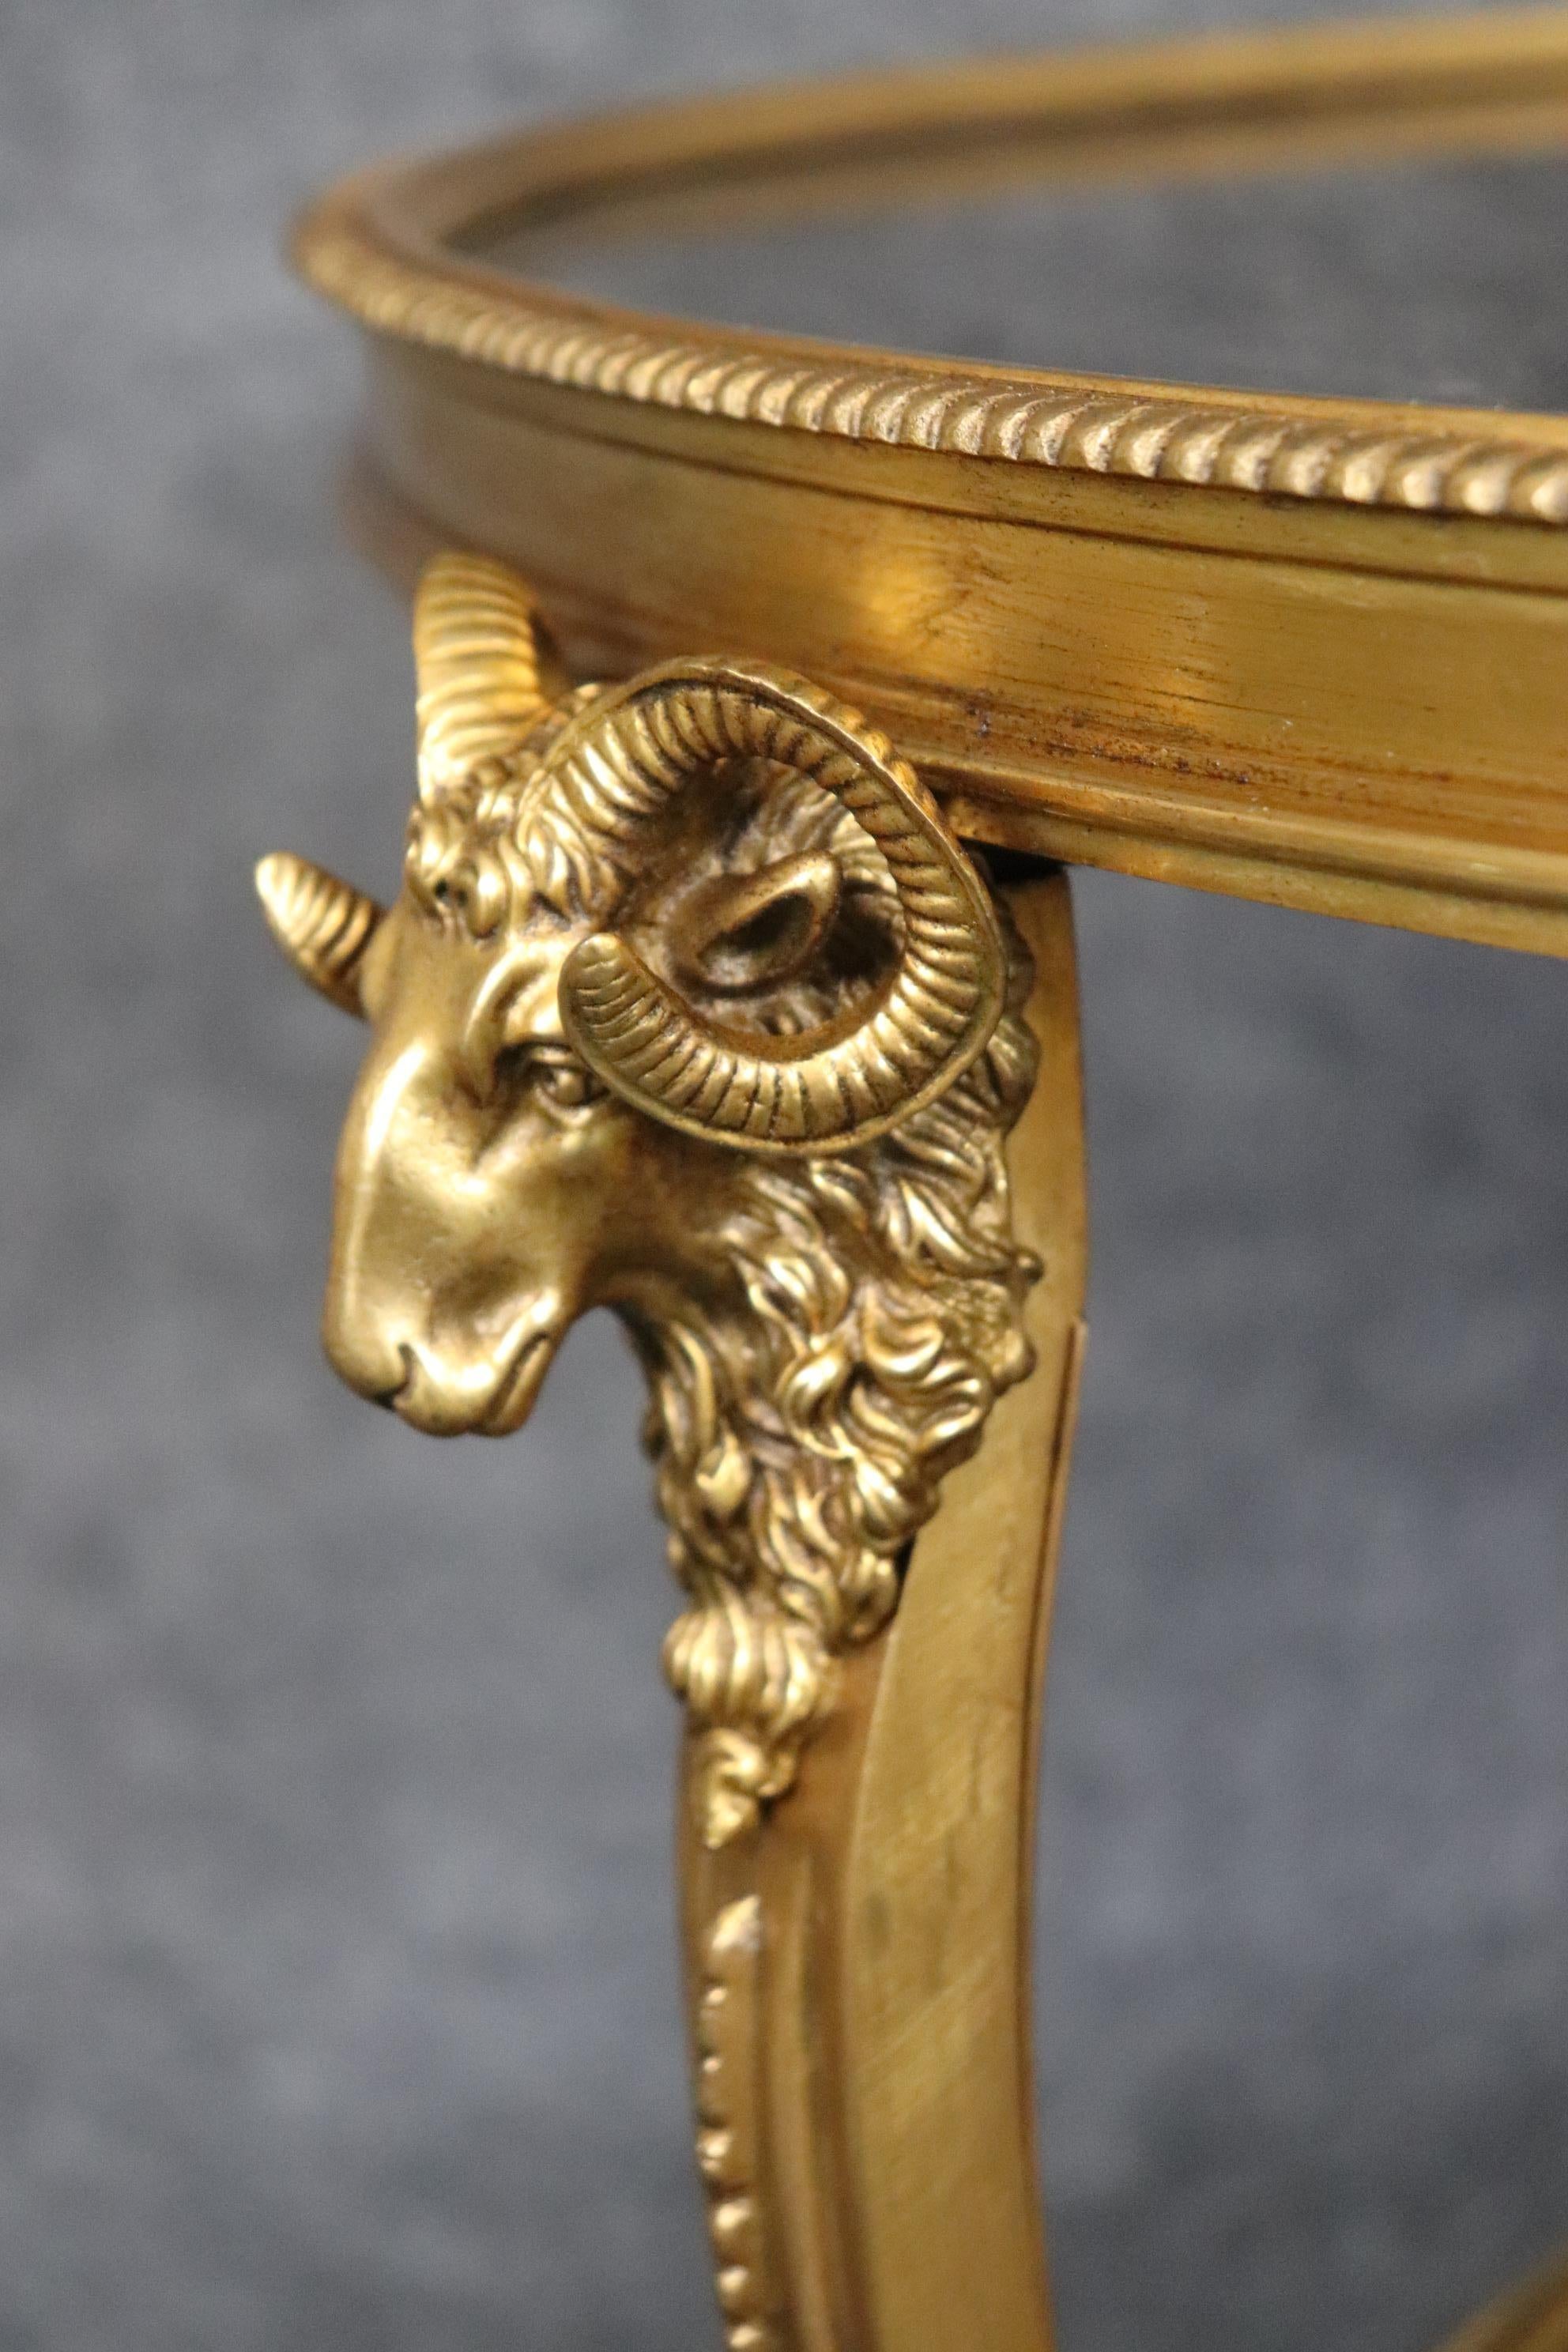 This is a superb pair of dore' gilt bronze gueridons with incredible workmanship and bright 23kt gold dore' finishing. The rams heads are superbly cast and highly naturalistic and well-defined. The table features gorgeous varigated black marble tops